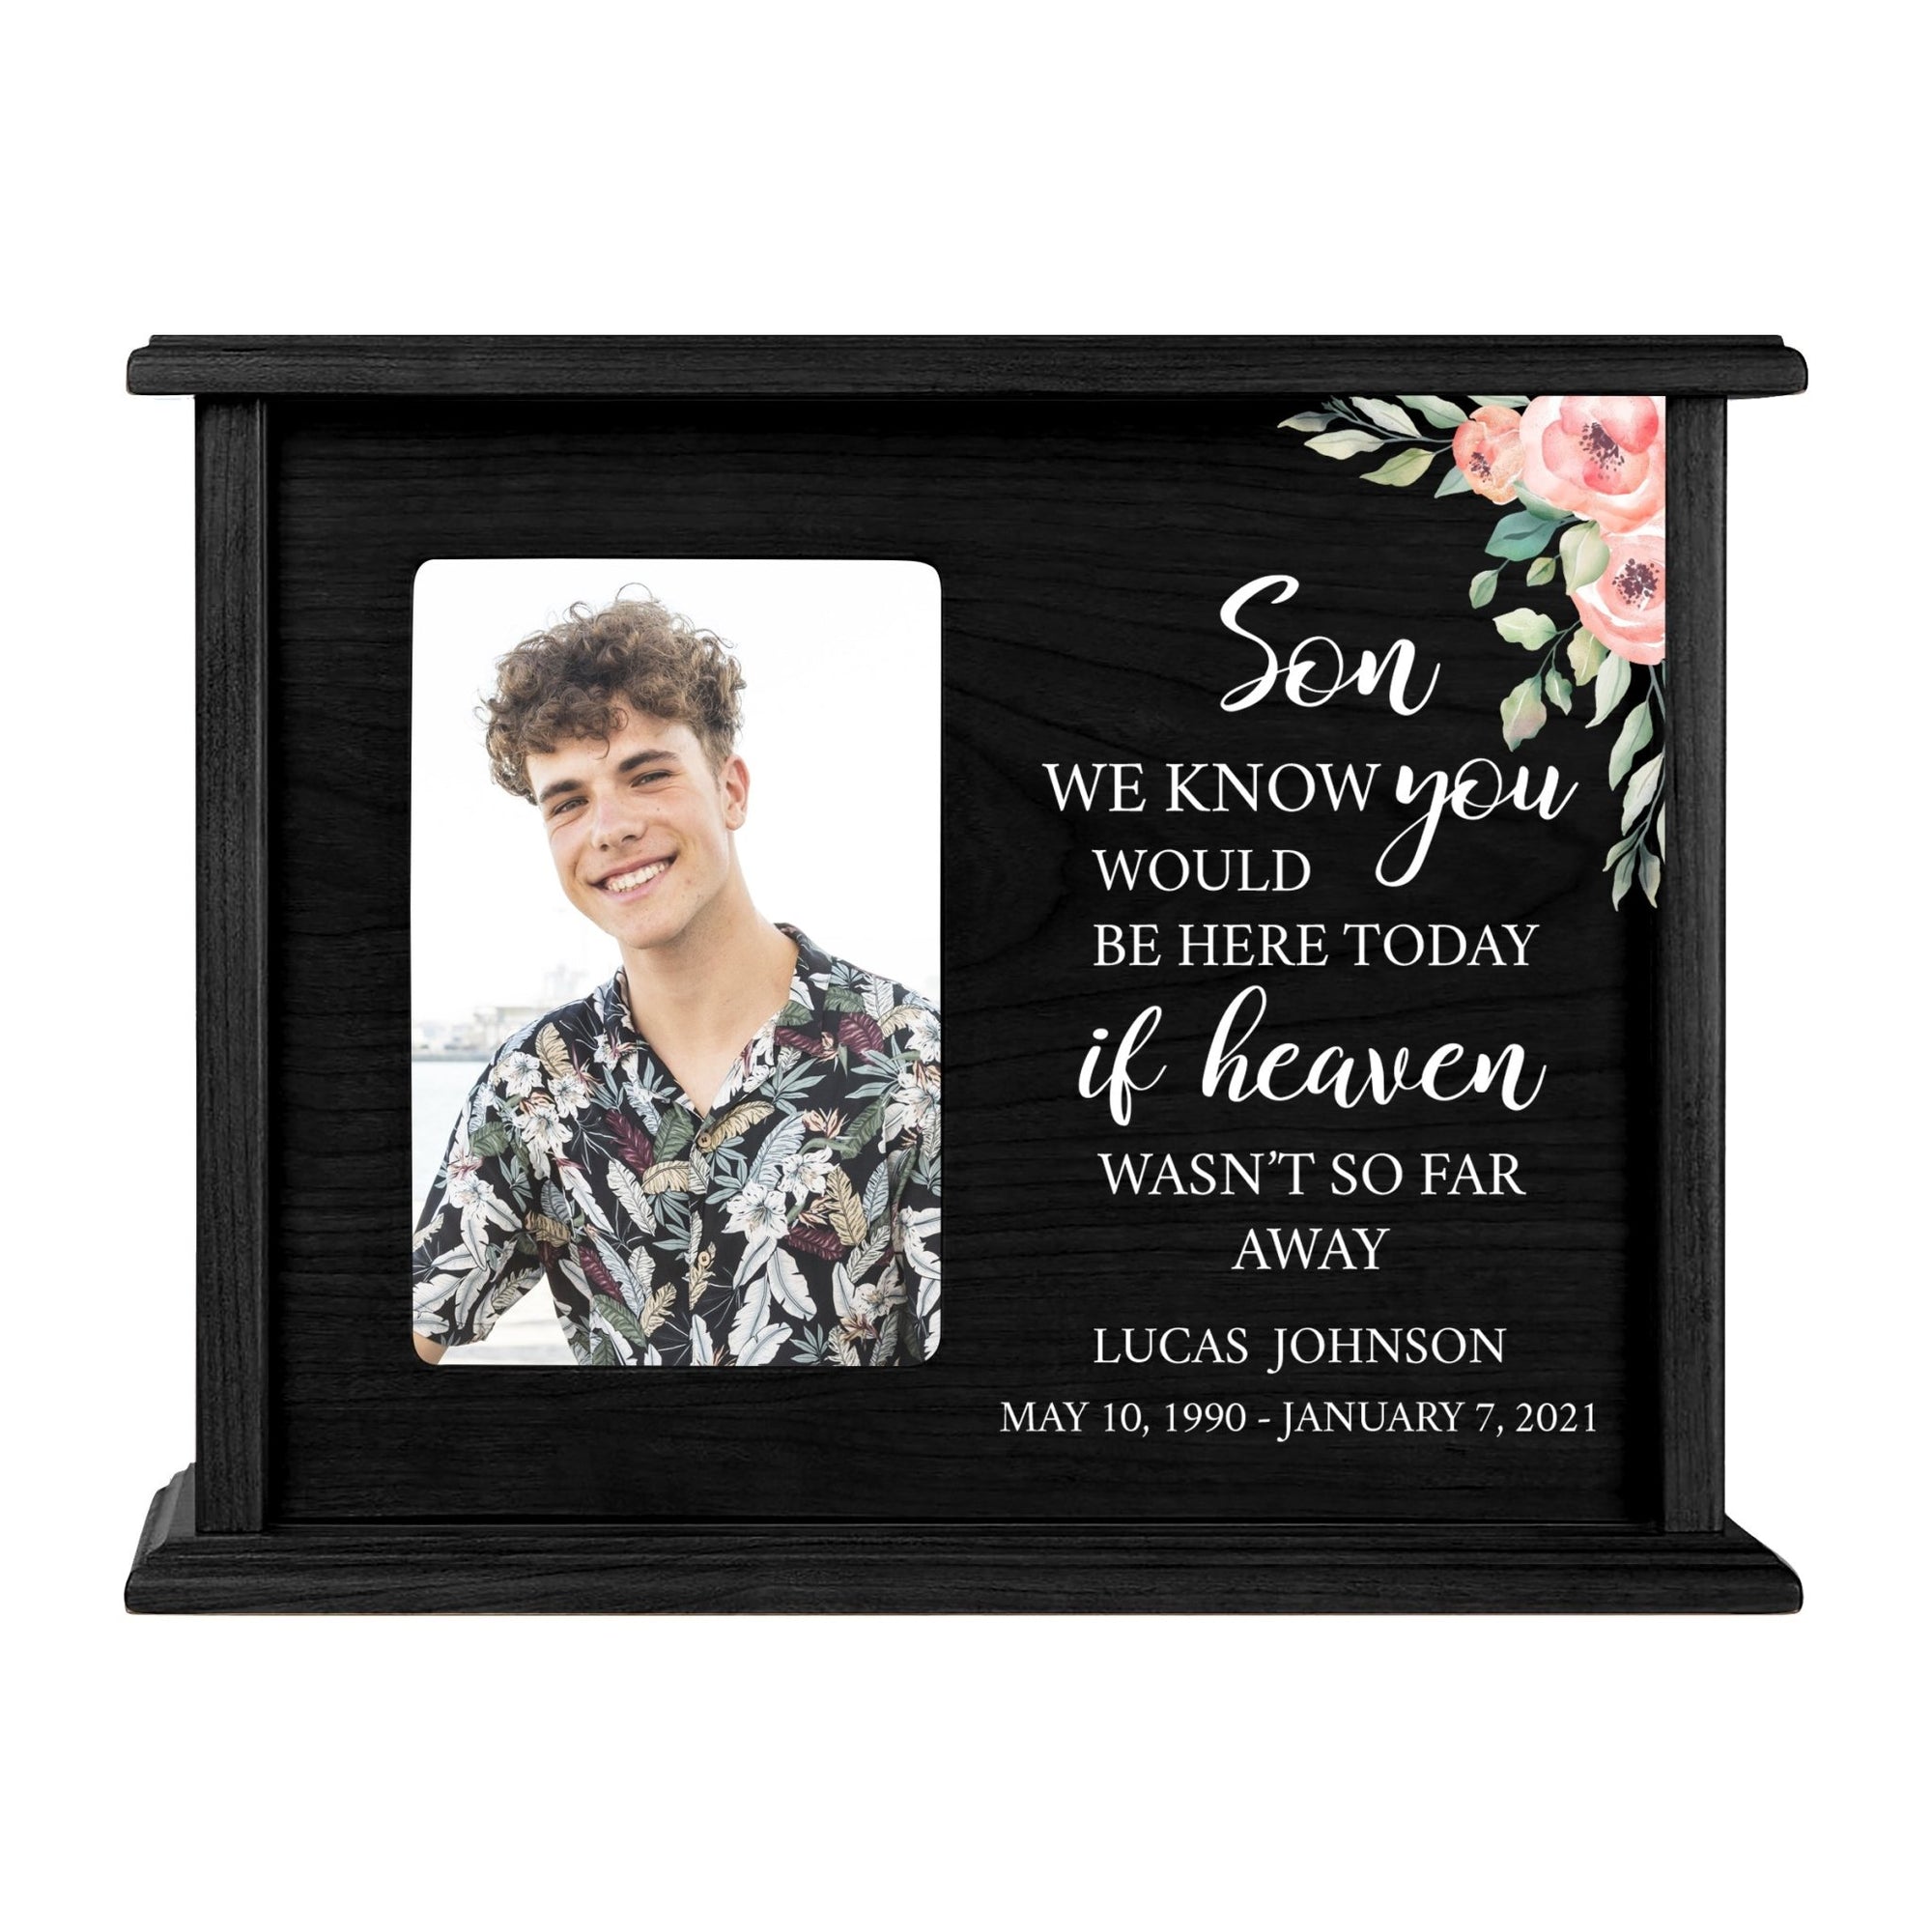 Personalized Memorial Cherry Wood 12 x 4.5 x 9 Cremation Urn Box with Picture Frame holds 200 cu in of Human Ashes and 4x6 Photo - We Know You Would (Black) - LifeSong Milestones